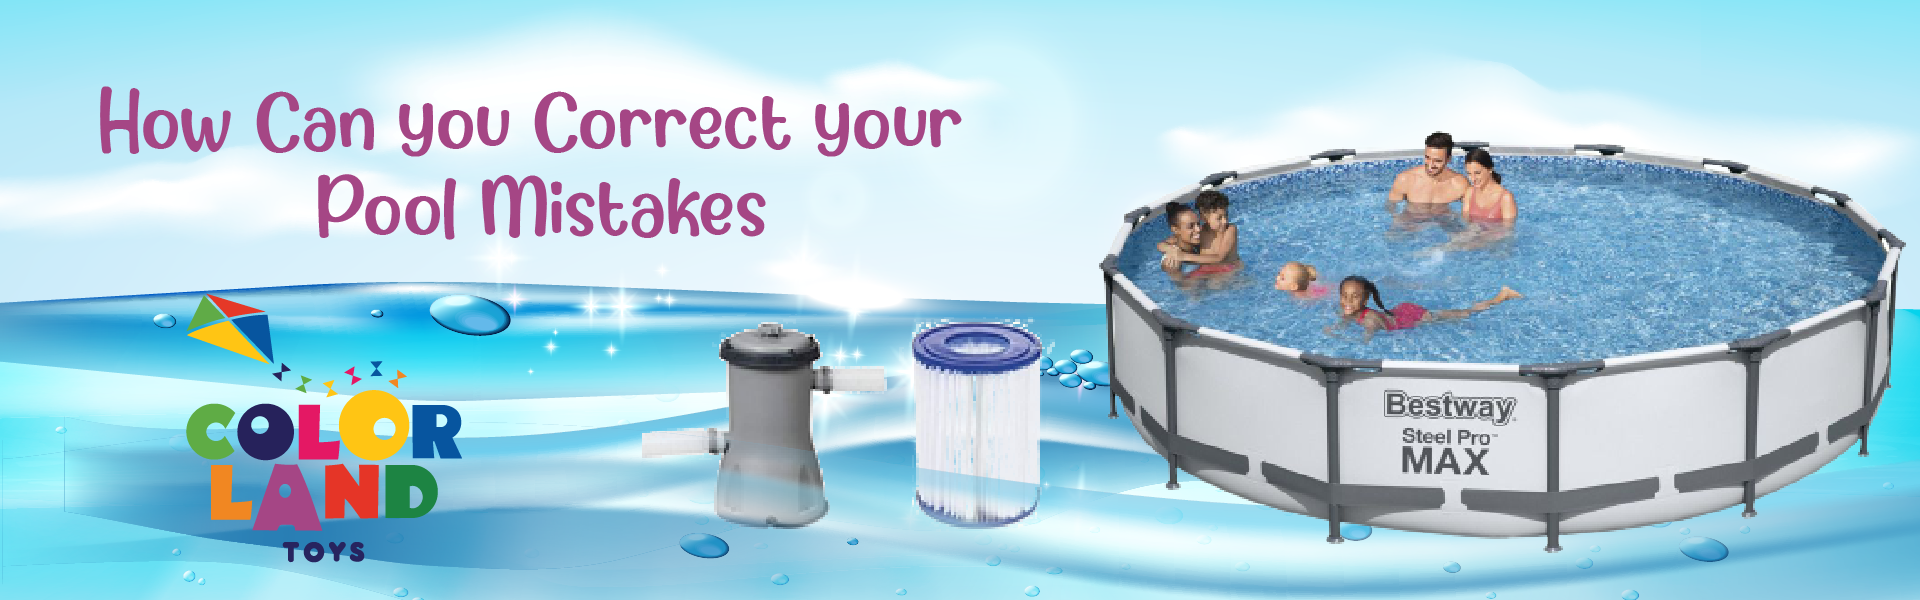 How Can you Correct your Pool Mistakes banner